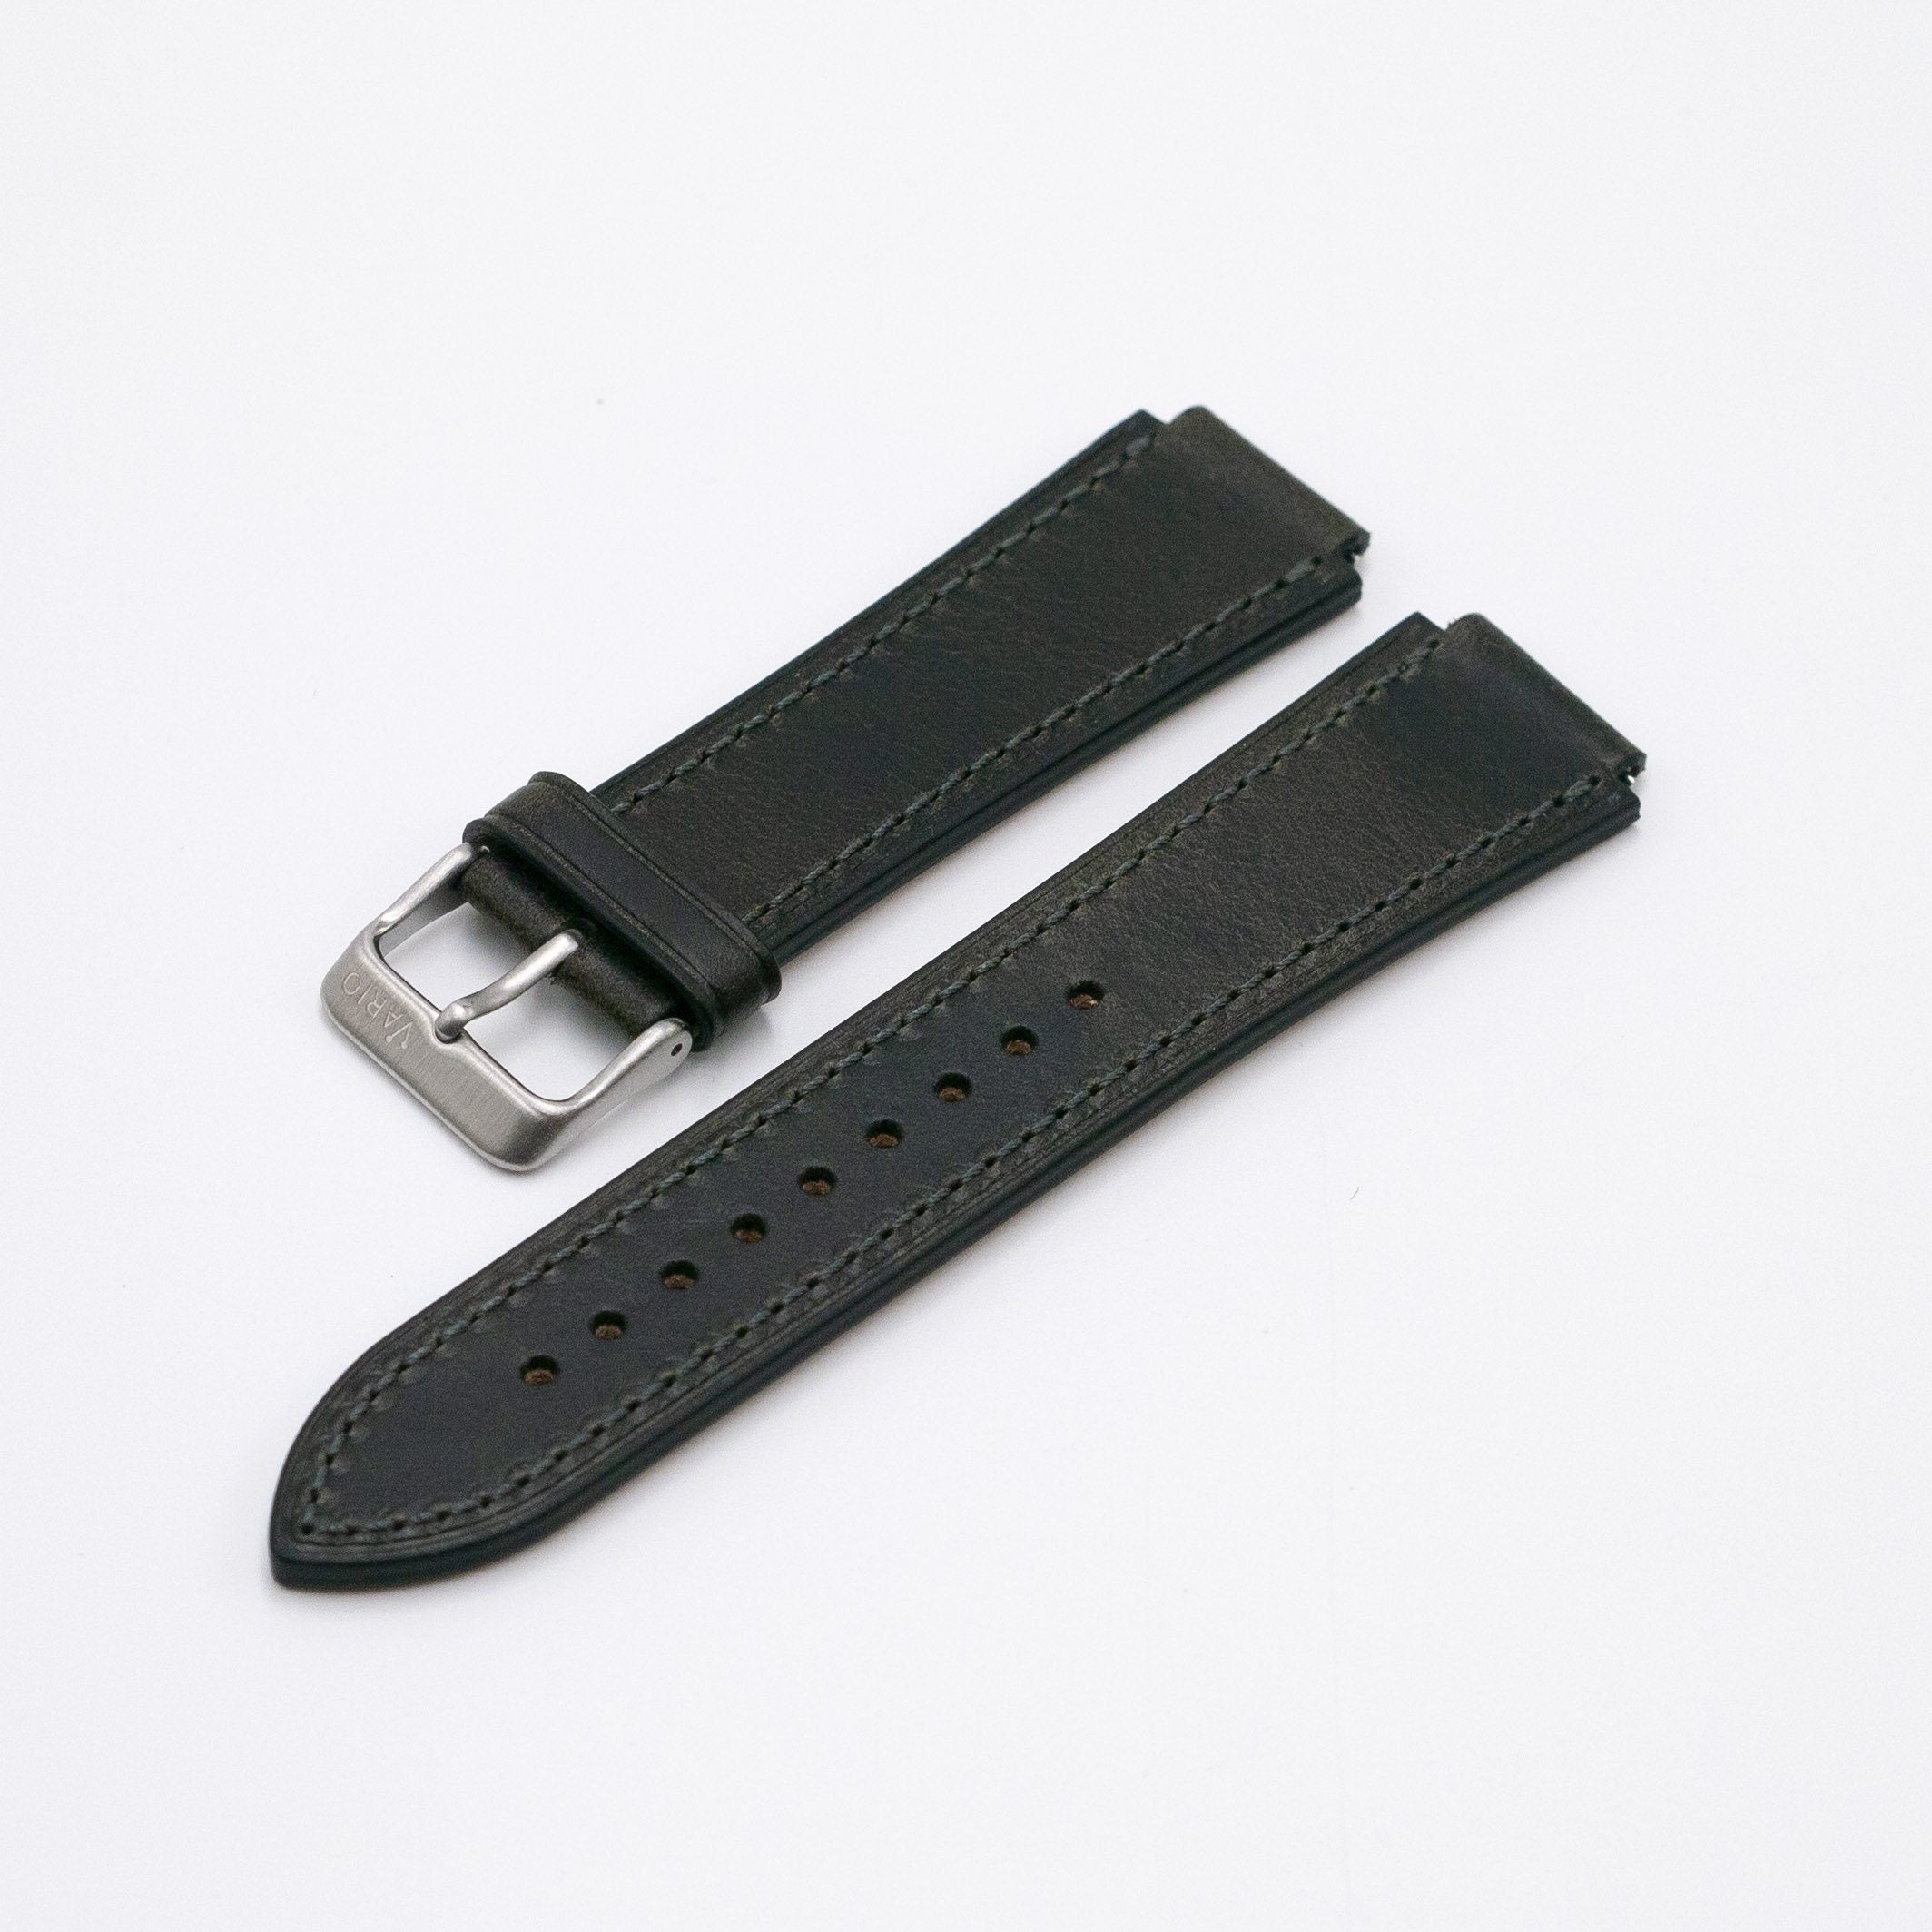 Oiled Leather Graphite Black Watch Strap for Casio AE1200WH World Time Watch